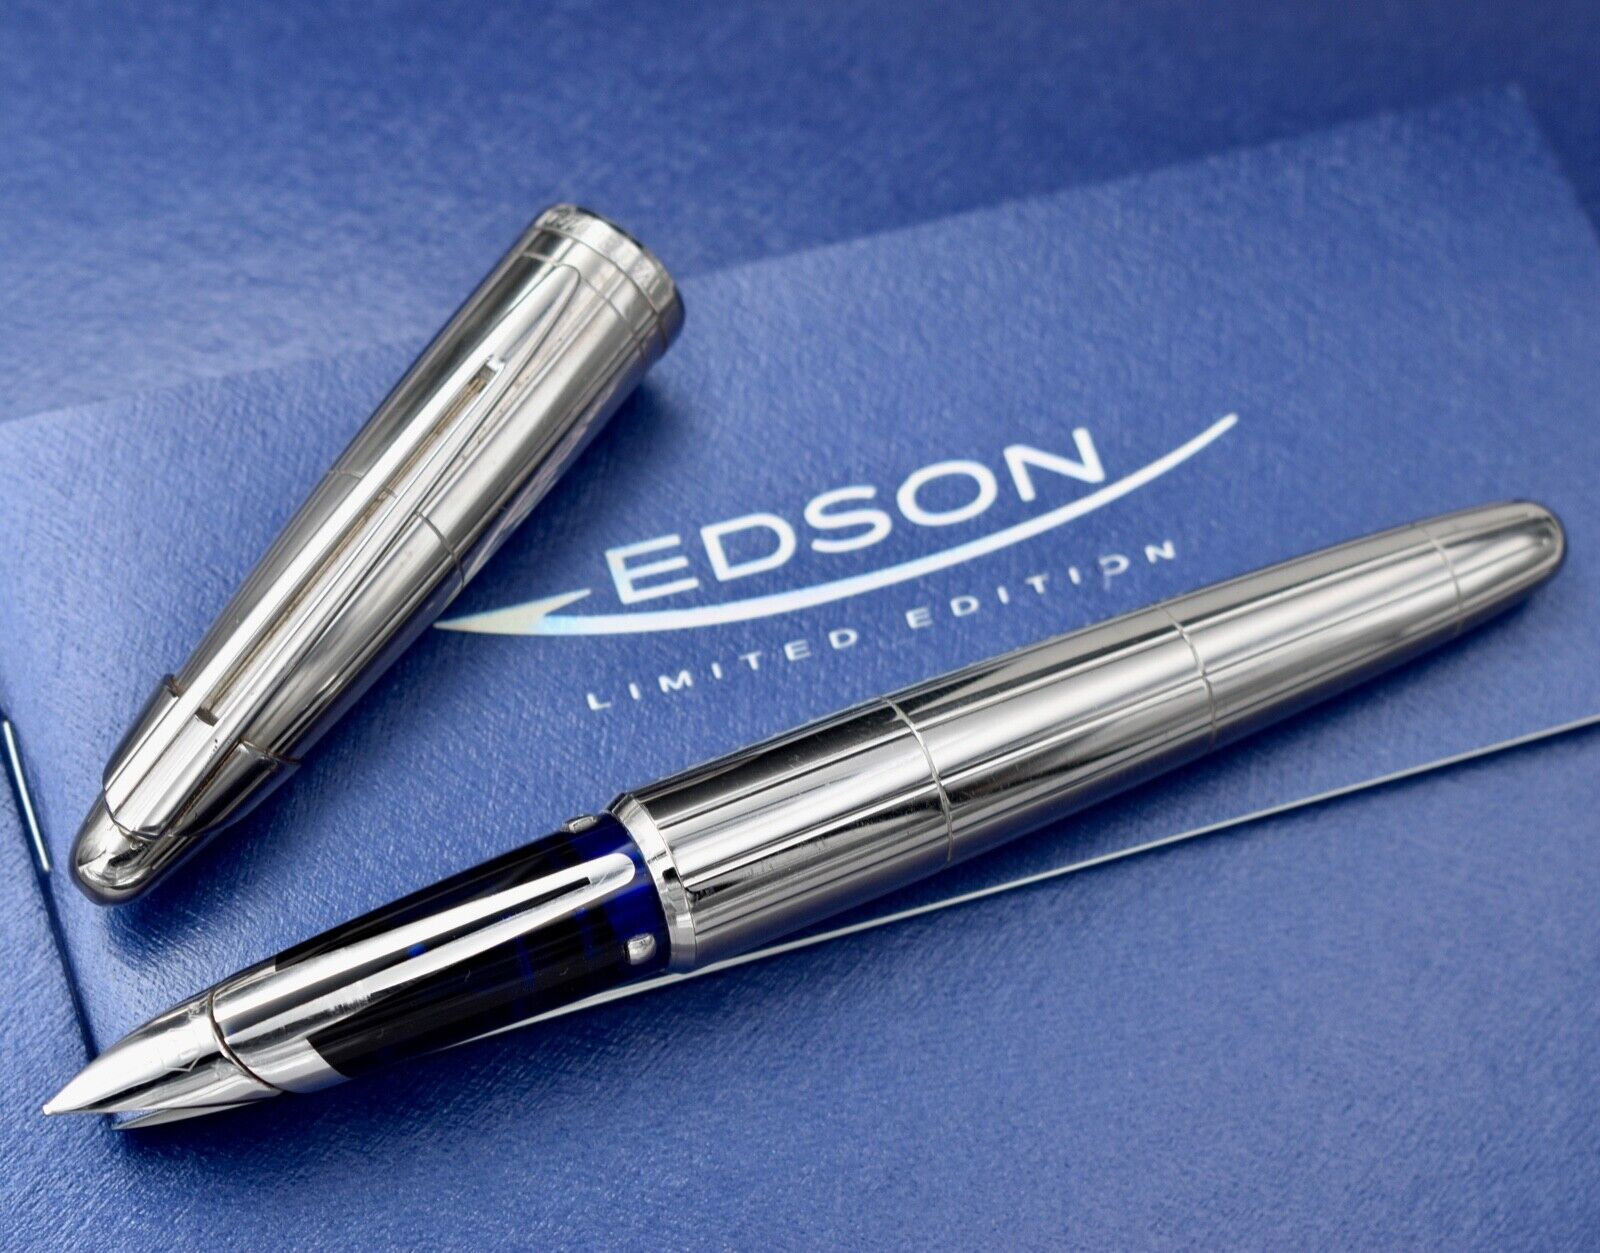 WATERMAN Edson 120 Ans Anniversary 1883 - 2003 Sterling Silver Limited Edition